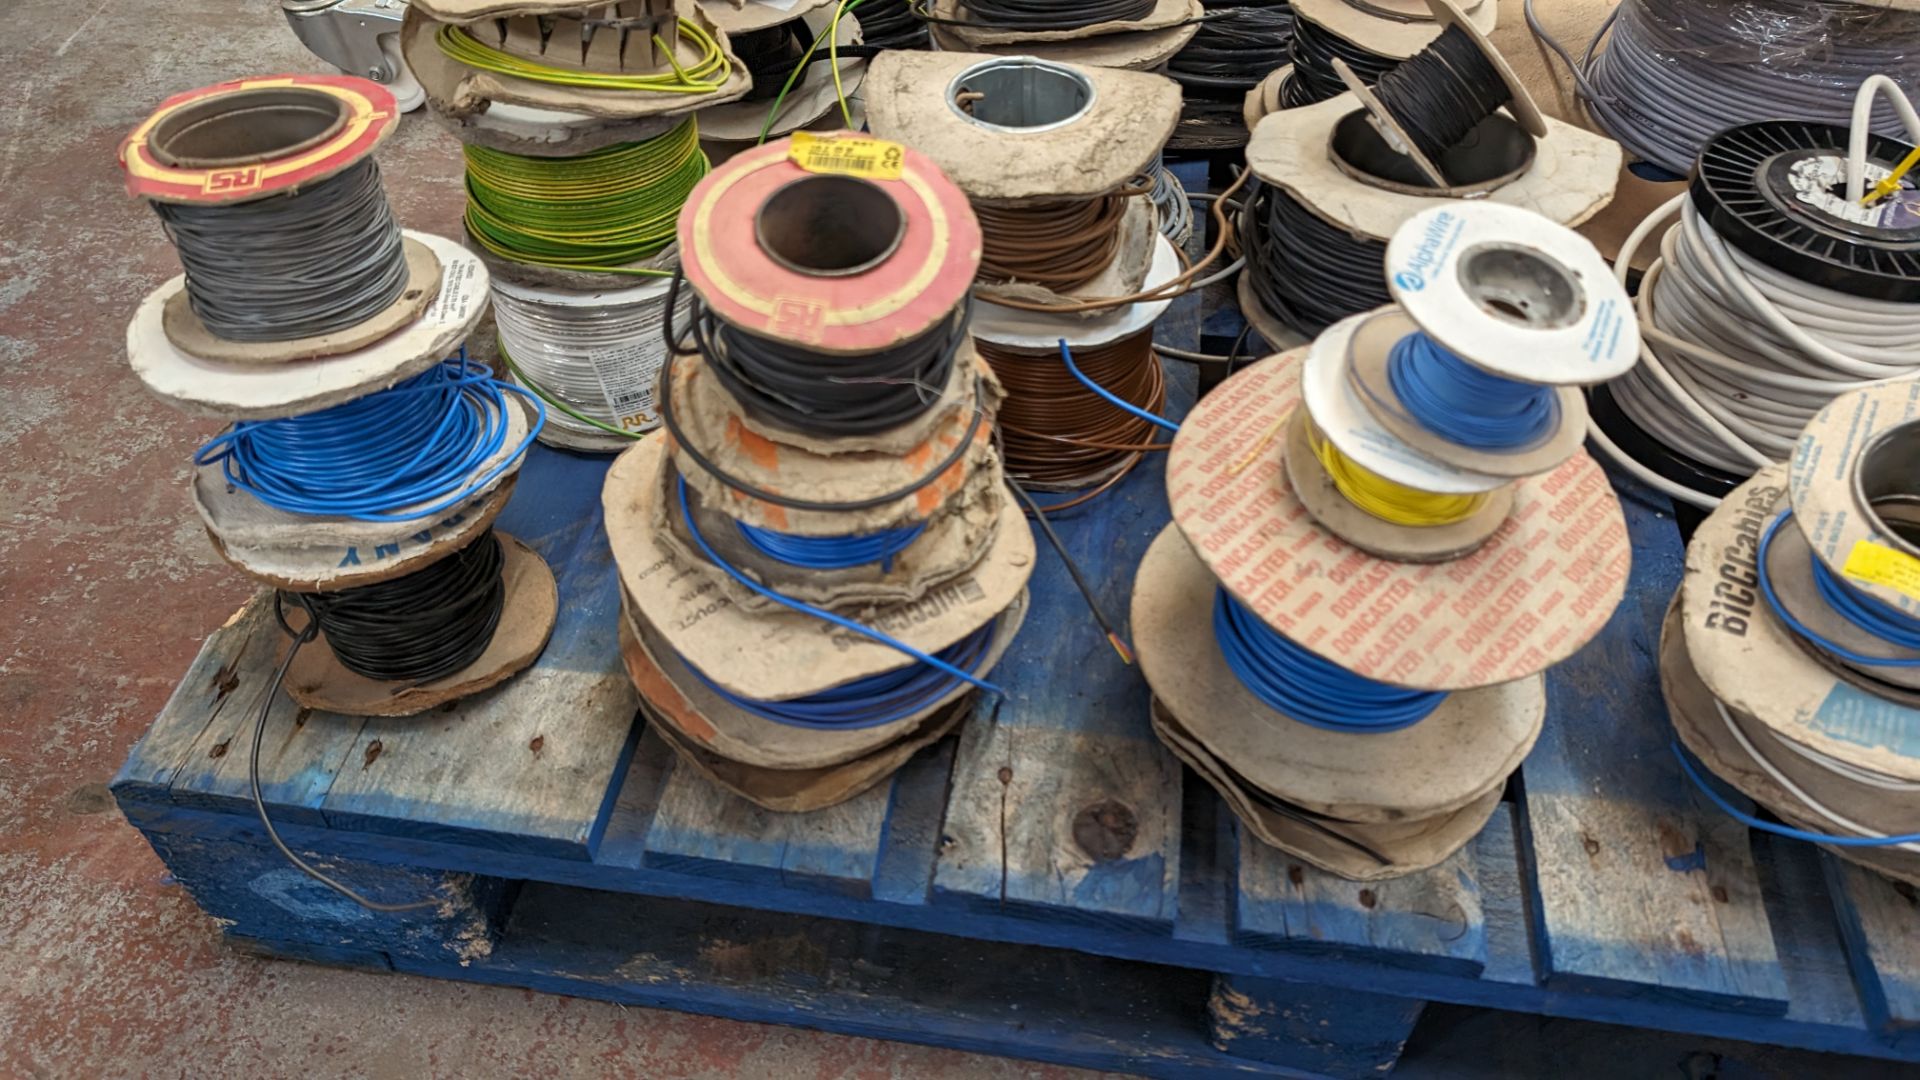 The contents of a pallet of electrical cable - Image 6 of 12